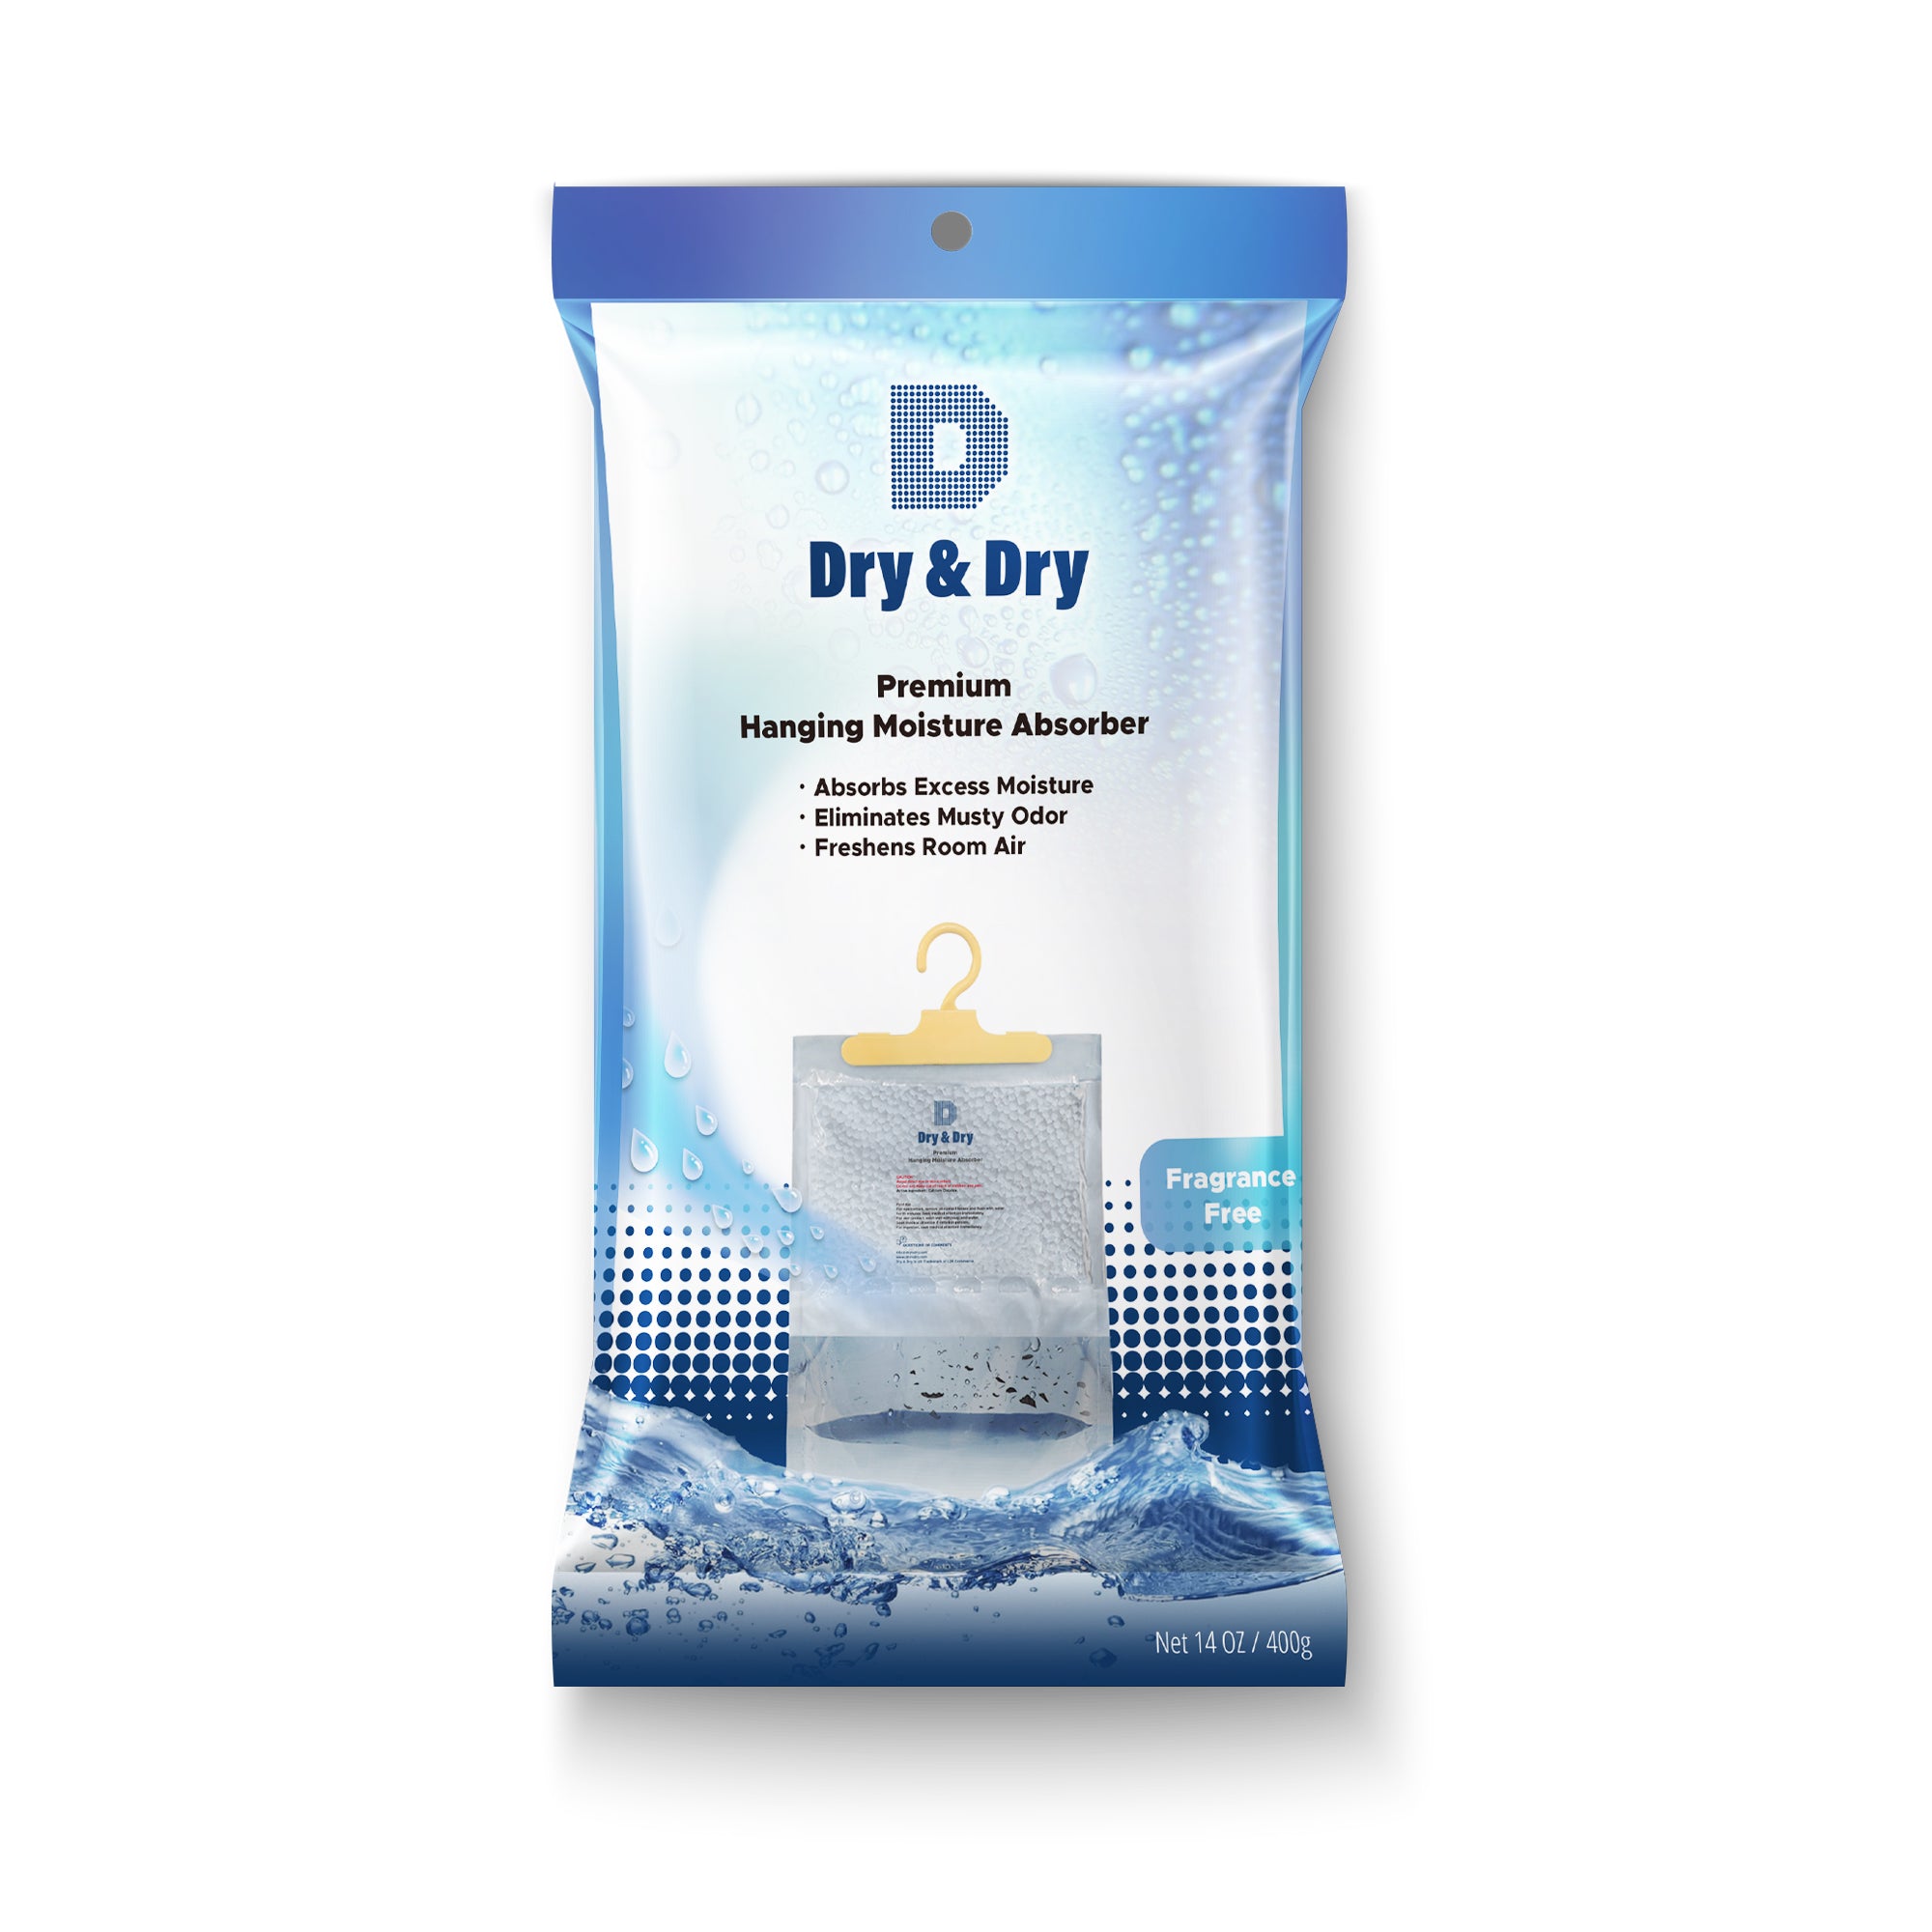 [20 pack] [Net 14.1 oz/Pack] “Dry & Dry” Premium Hanging Moisture Absorber to Control Excess Moisture for Basements, Bathrooms, Laundry Rooms, and Enclosed Spaces